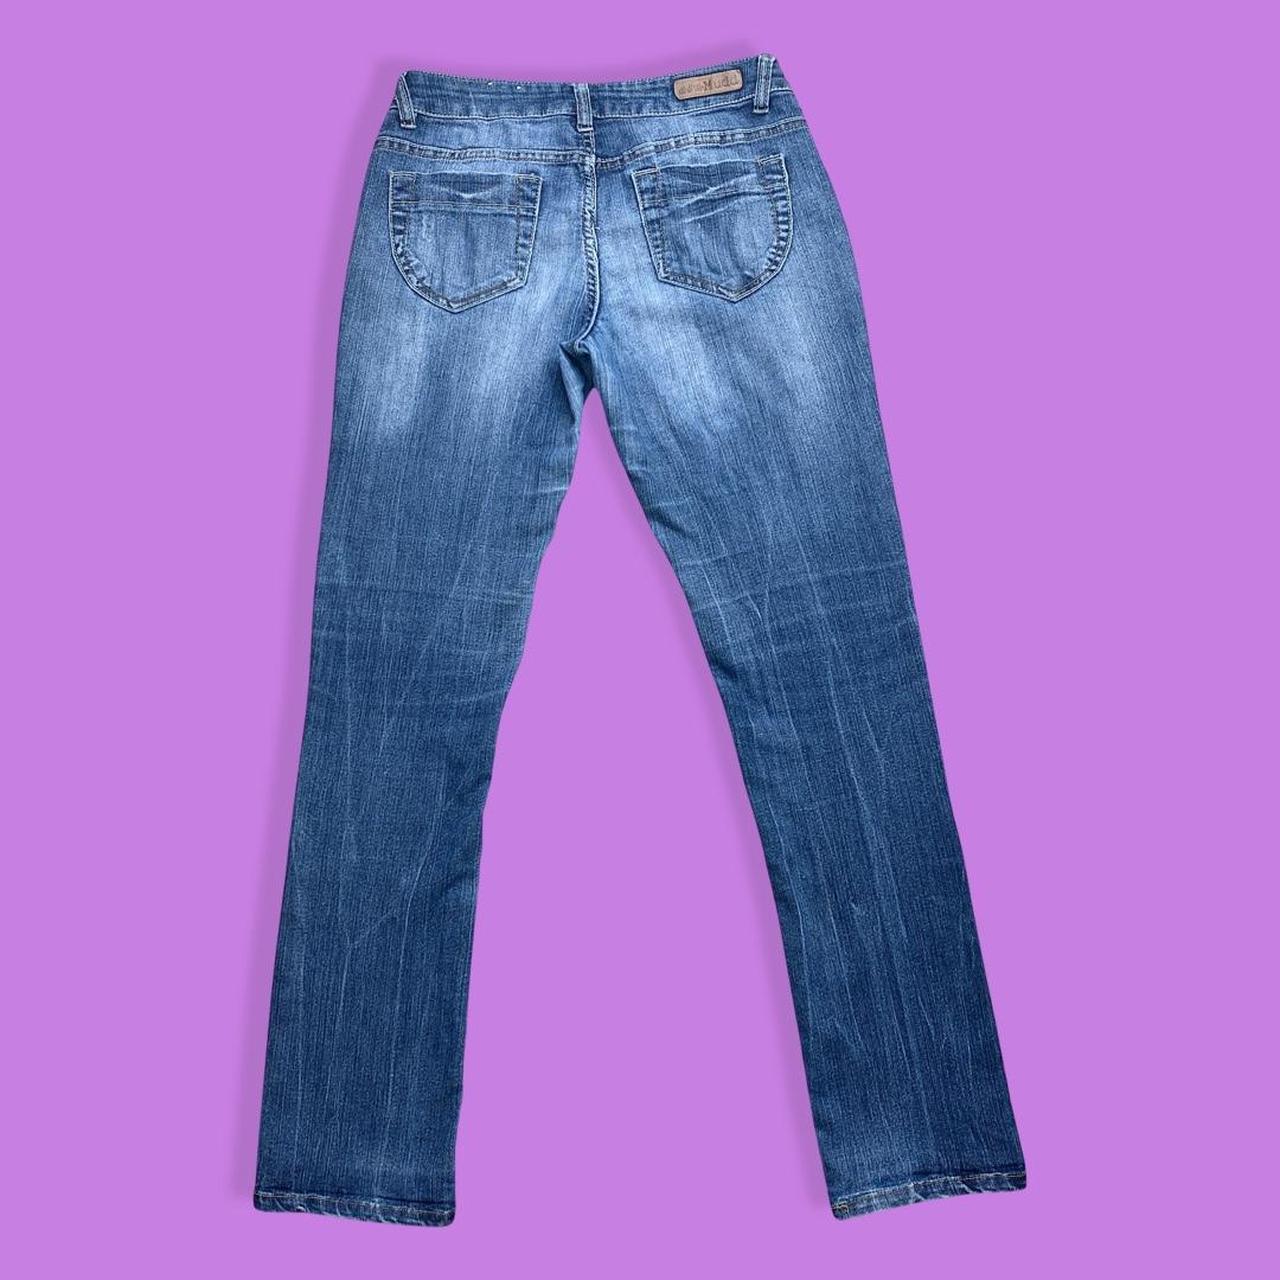 Product Image 2 - Mudd Y2k Vibes Skinny Jeans.